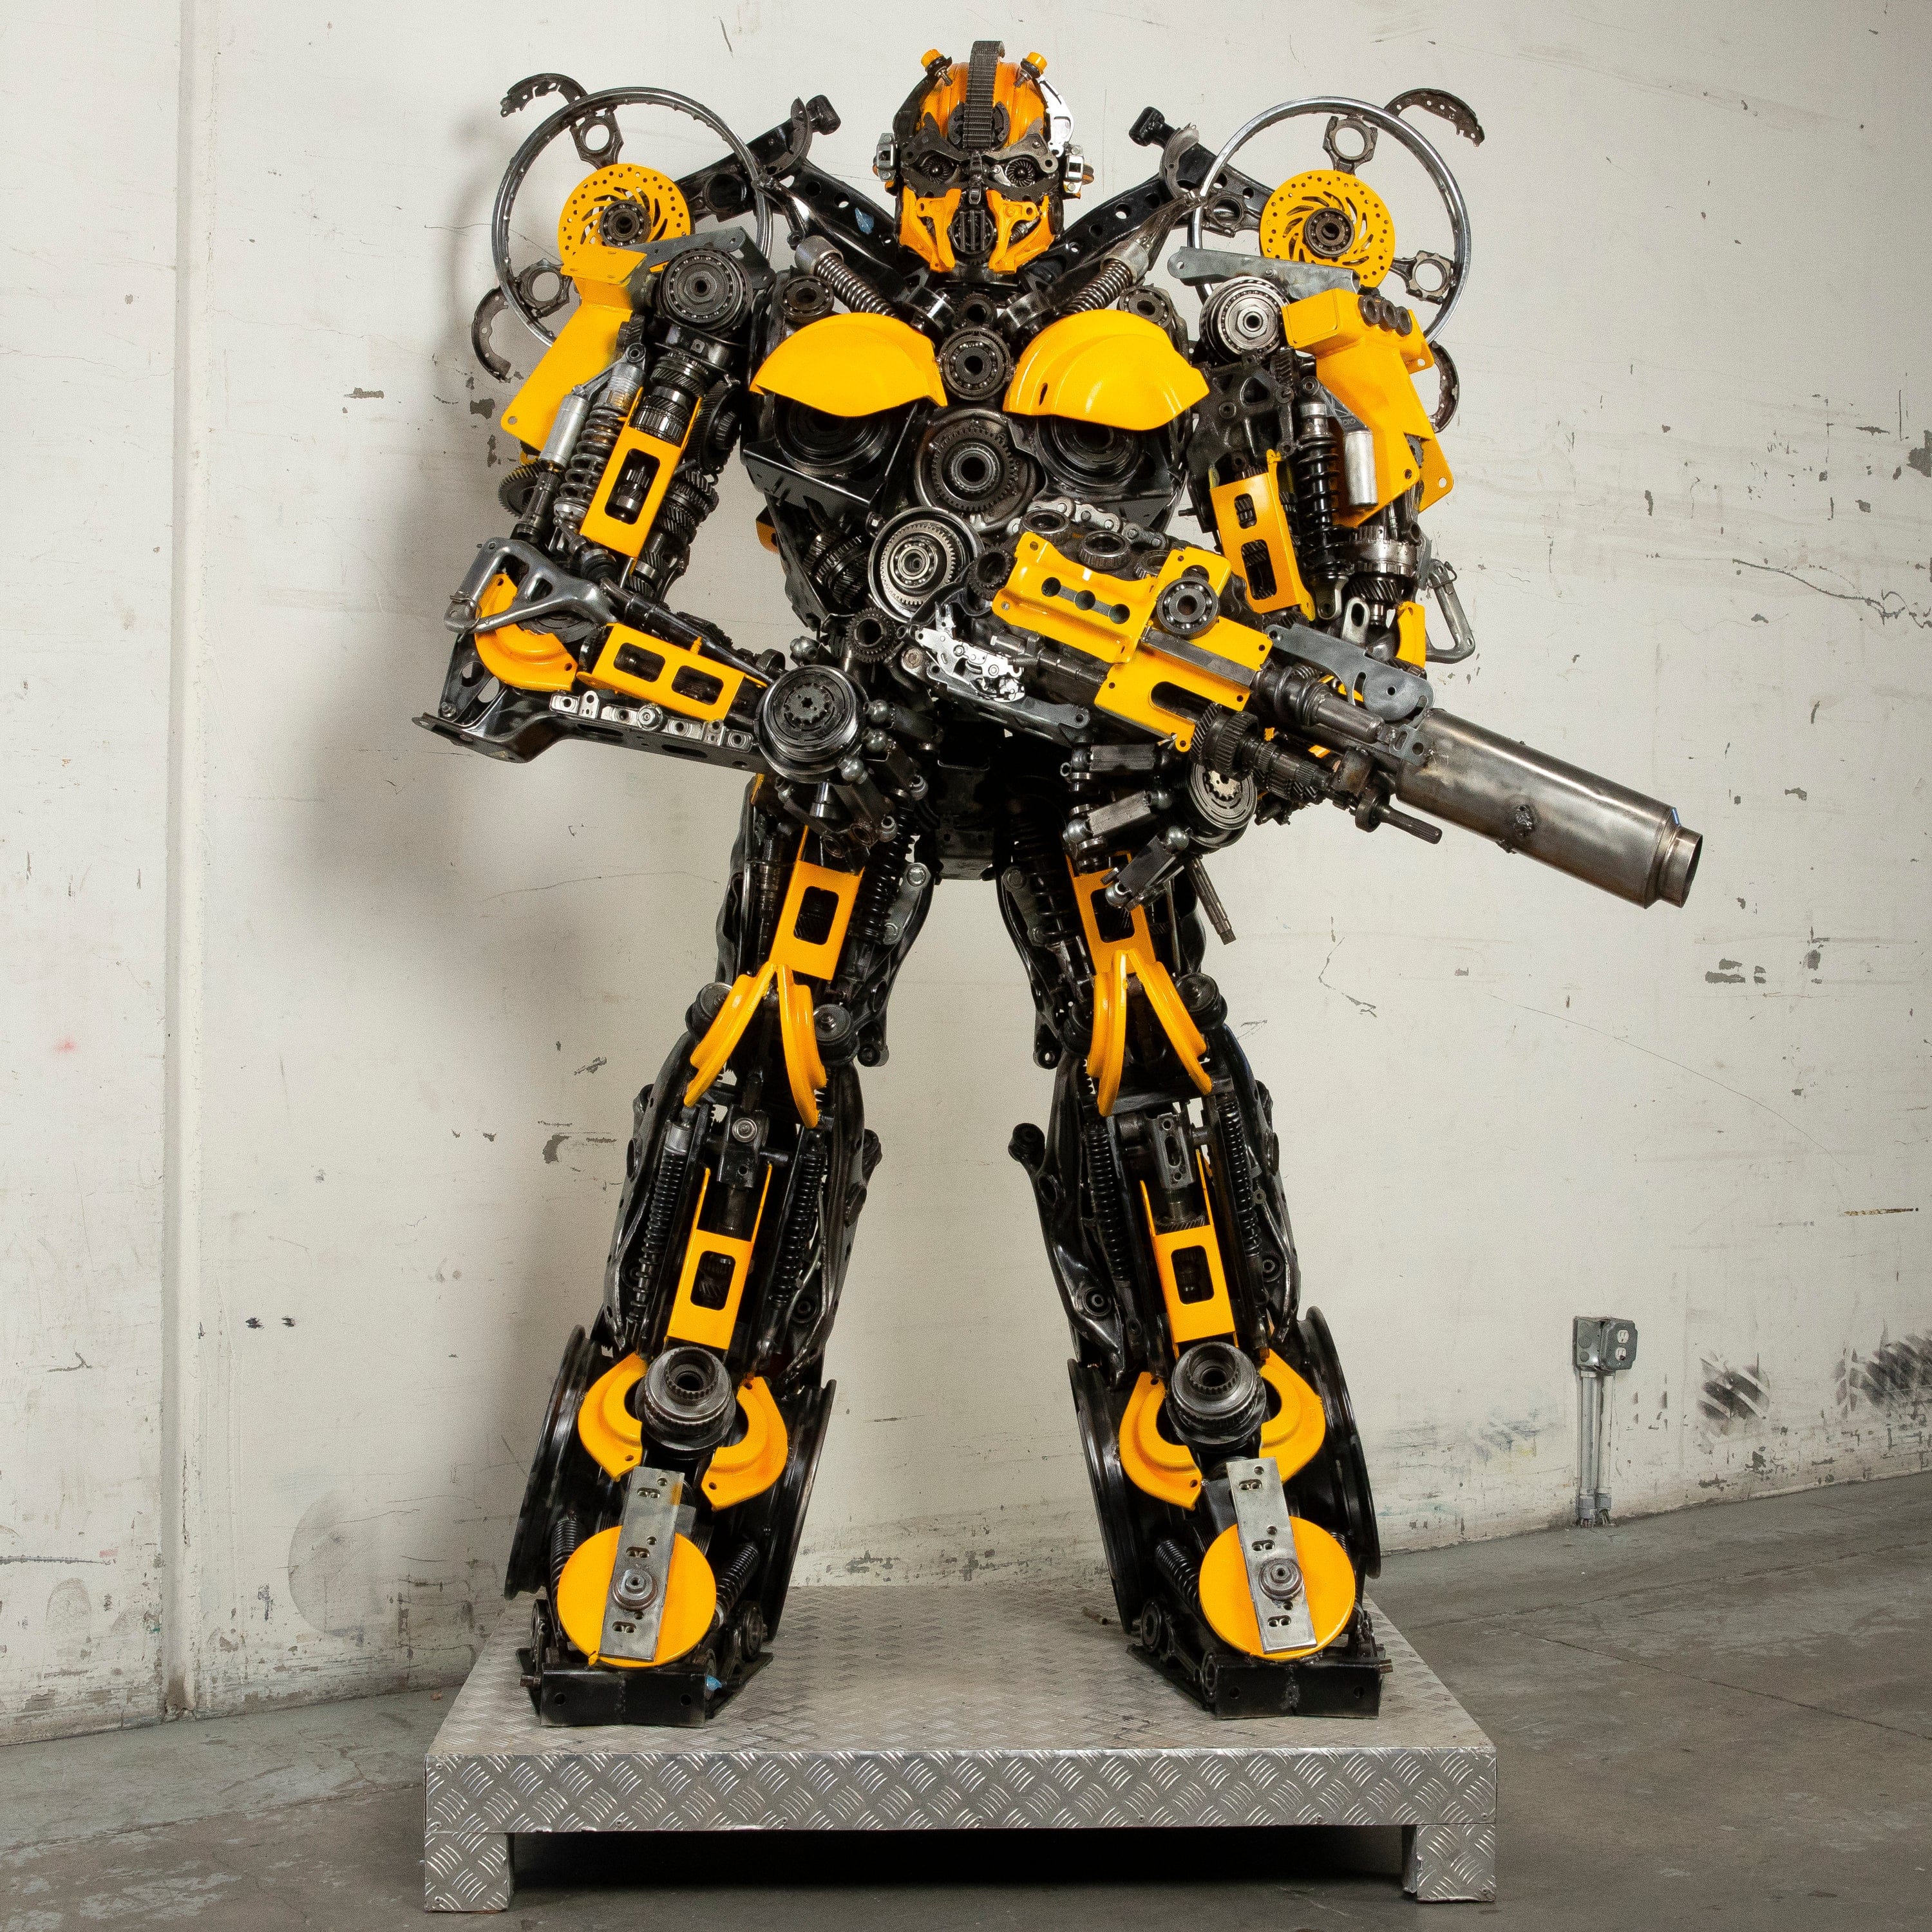 Kalifano Recycled Metal Art 91" Bumblebee Inspired Recycled Metal Art Sculpture RMS-BB230-S34